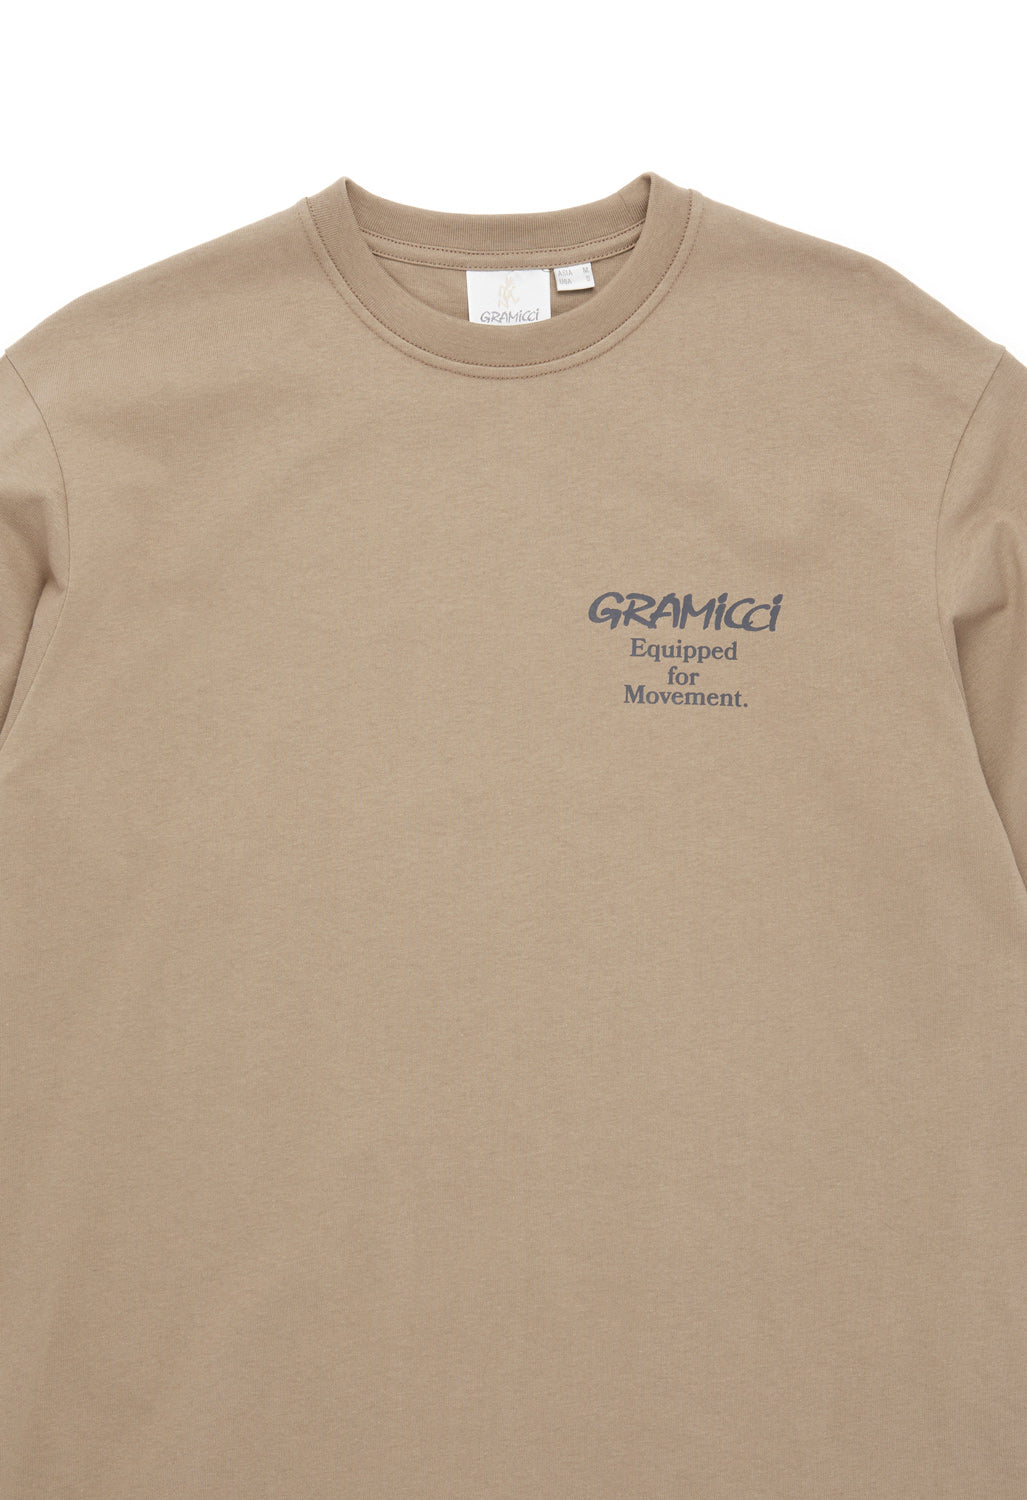 Gramicci Equipped Tee - Coyote